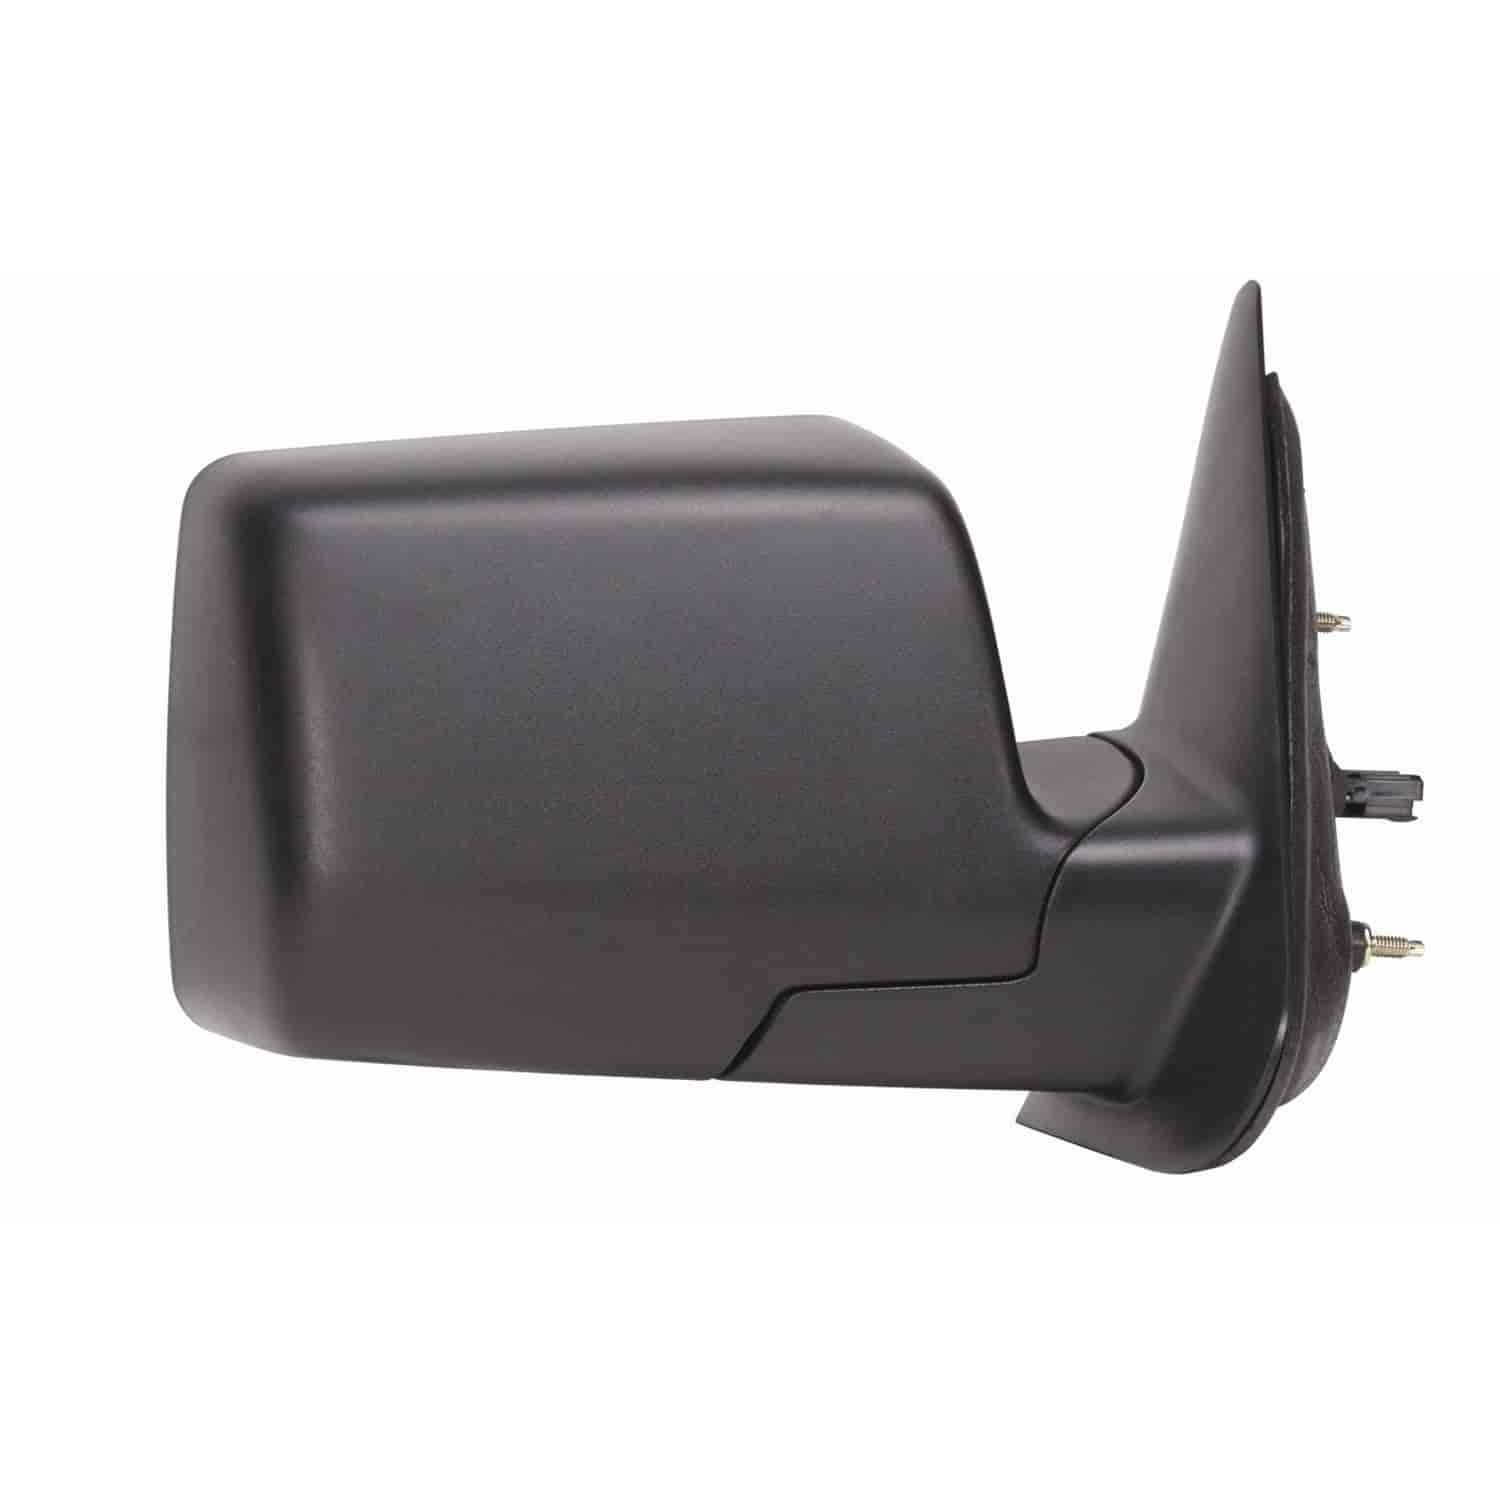 OEM Style Replacement mirror for 06-11 Ford Ranger passenger side mirror tested to fit and function